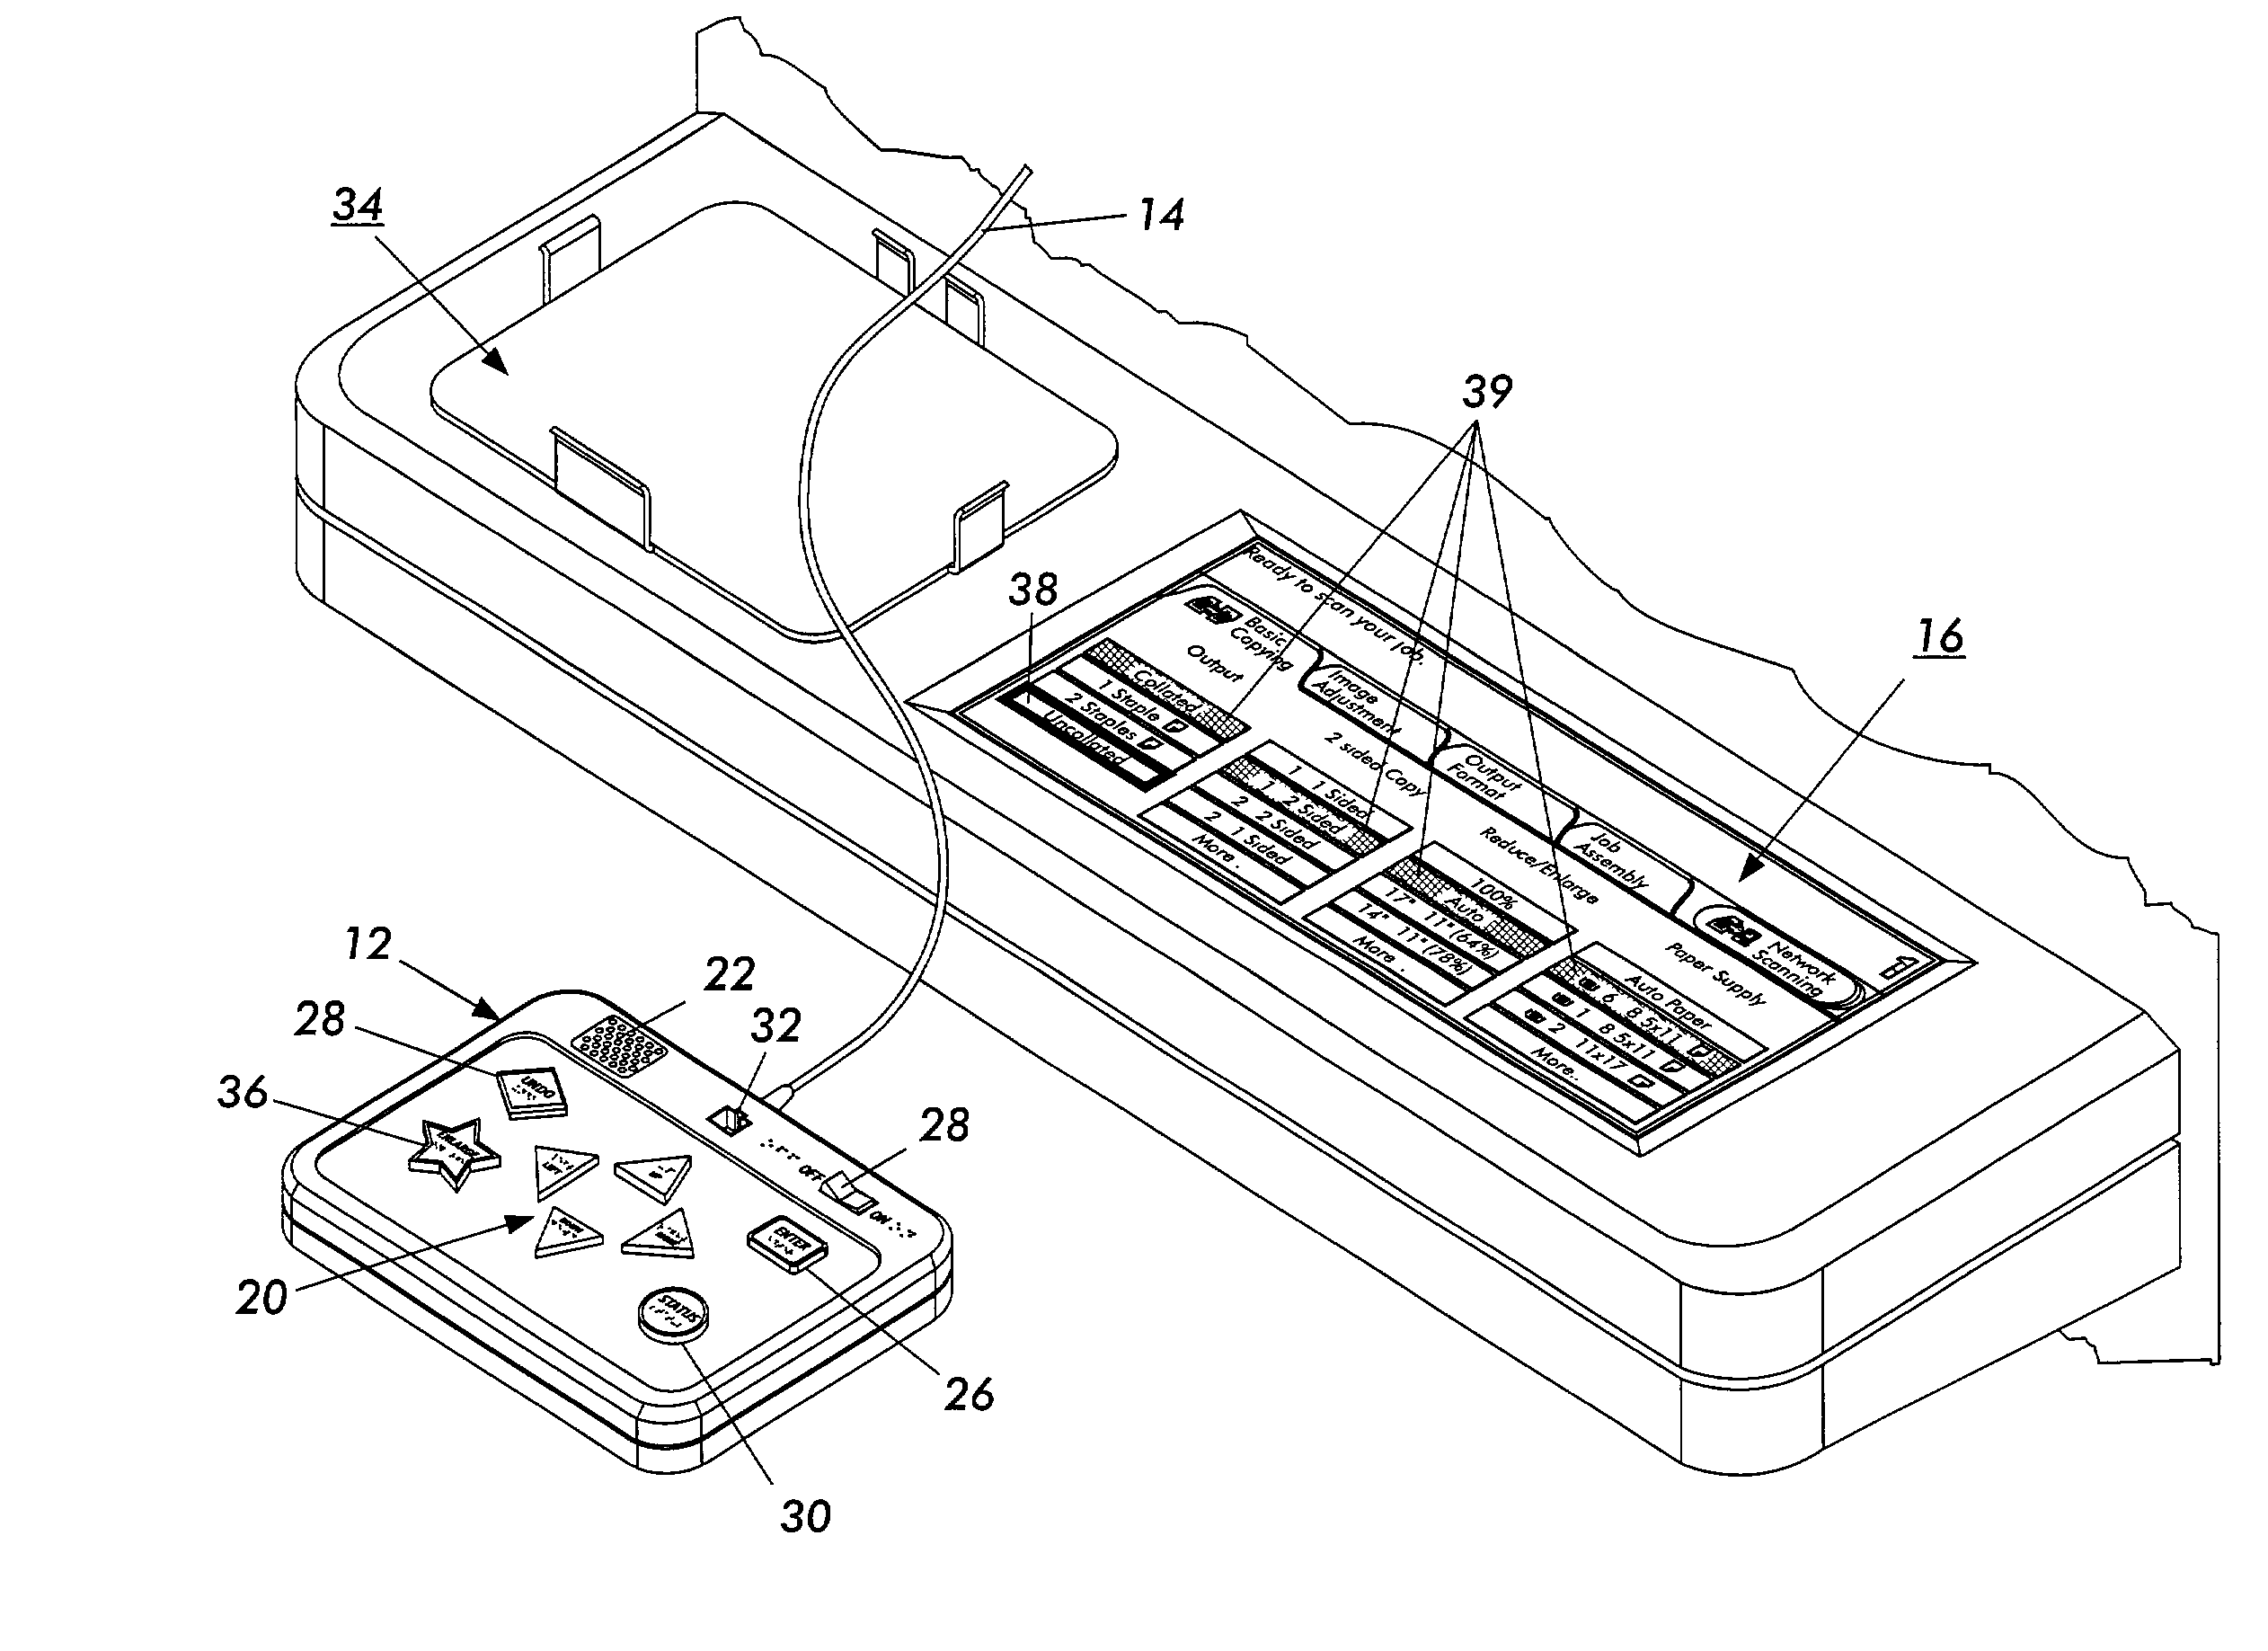 Removable control panel for multi-function equipment